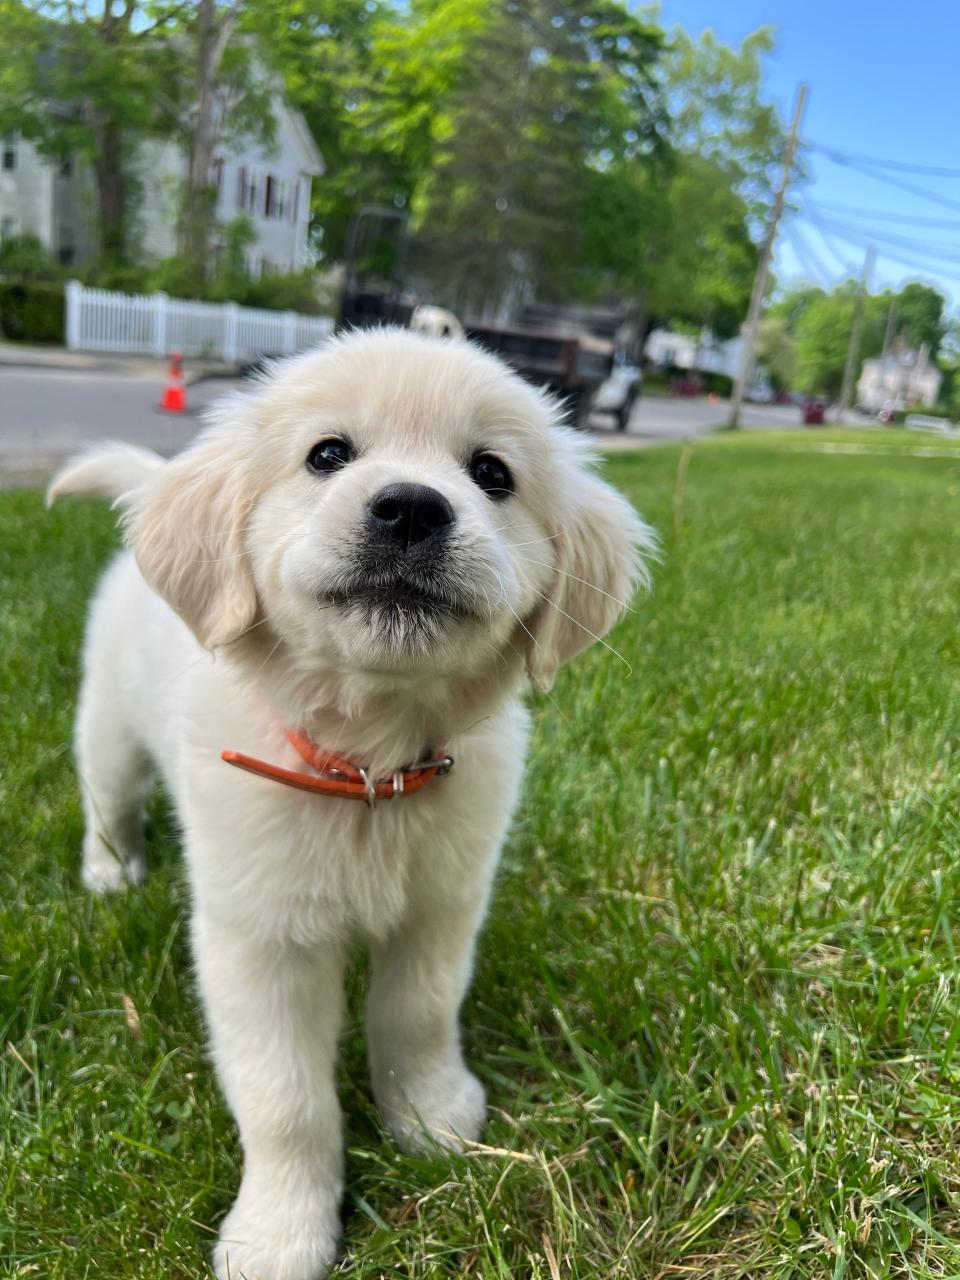 Maggie, a 9-week-old golden retriever, is the Taunton Police Department's brand new comfort dog. She first reported for duty in May 2023.